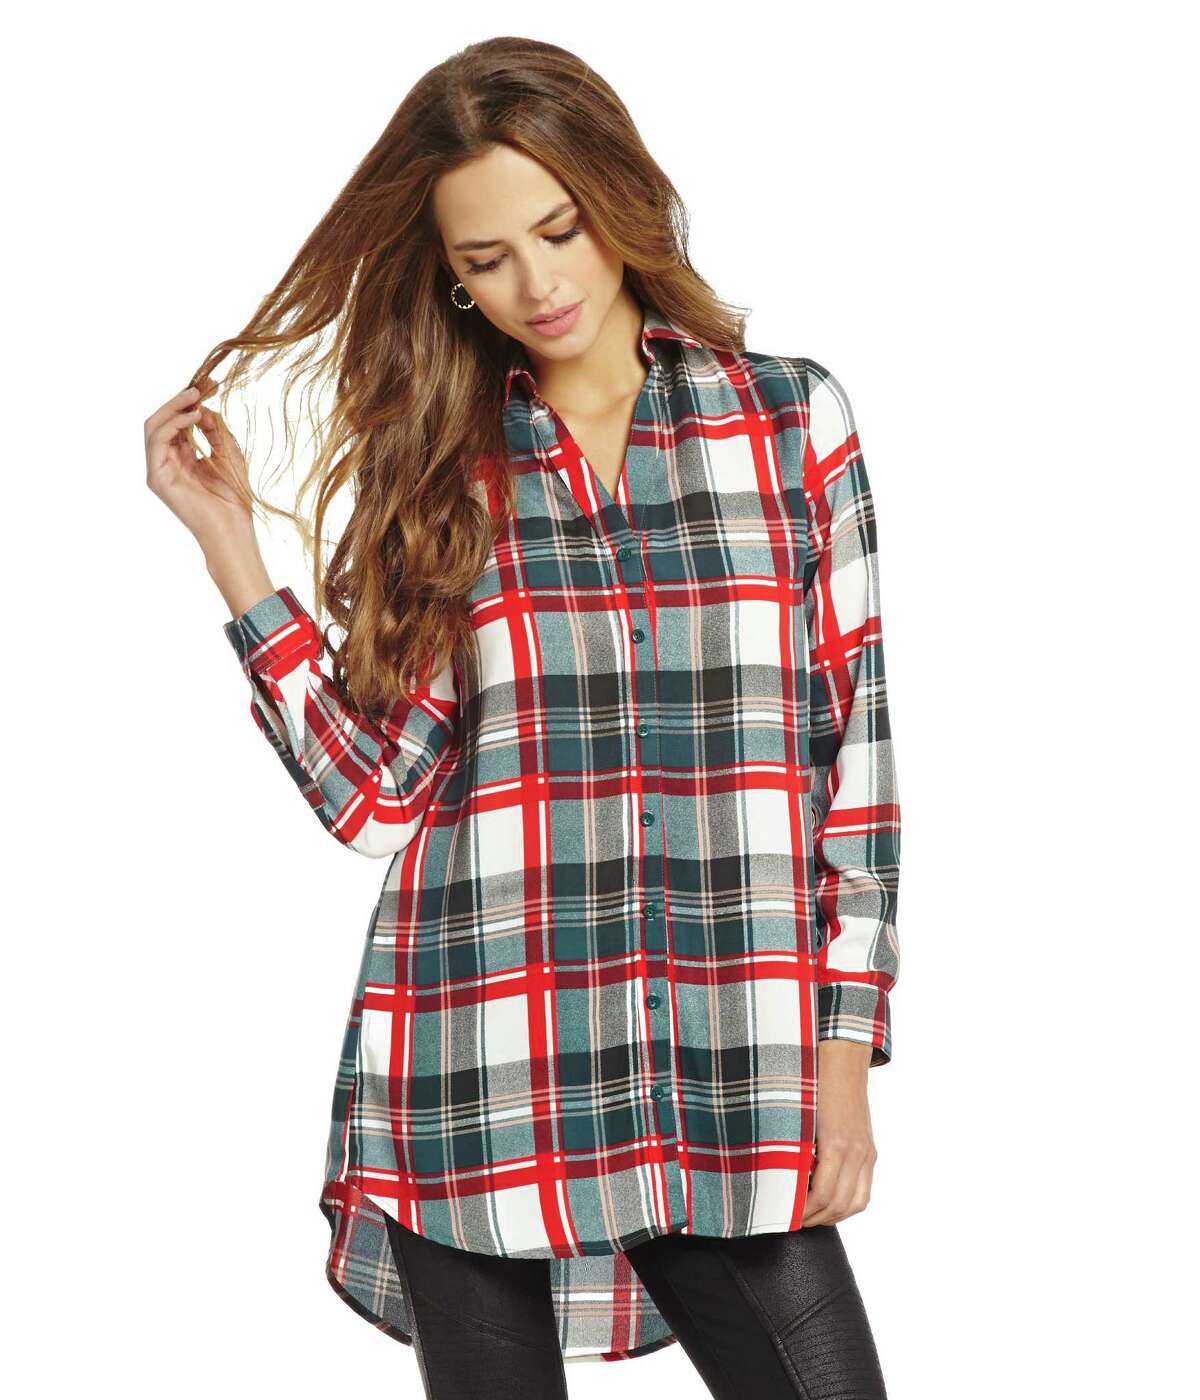 From grunge to preppy, plaid rules